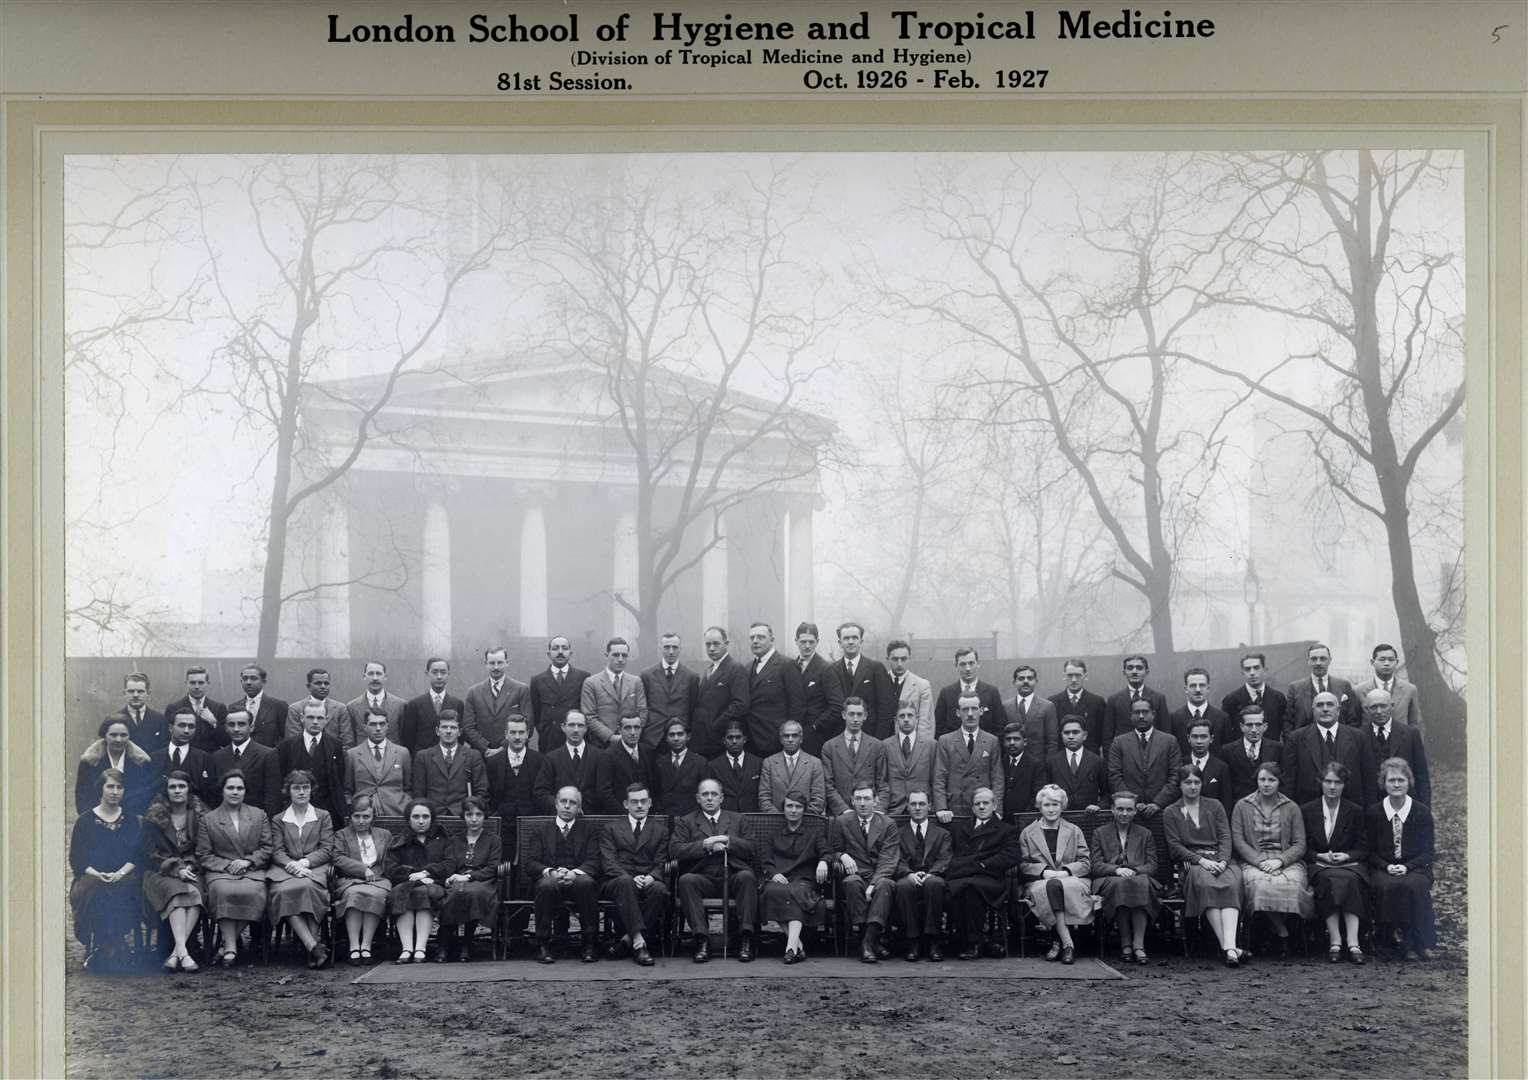 Members of the London School of Tropical Medicine in 1927, including Dr Chisholm, front row, ninth from the right.